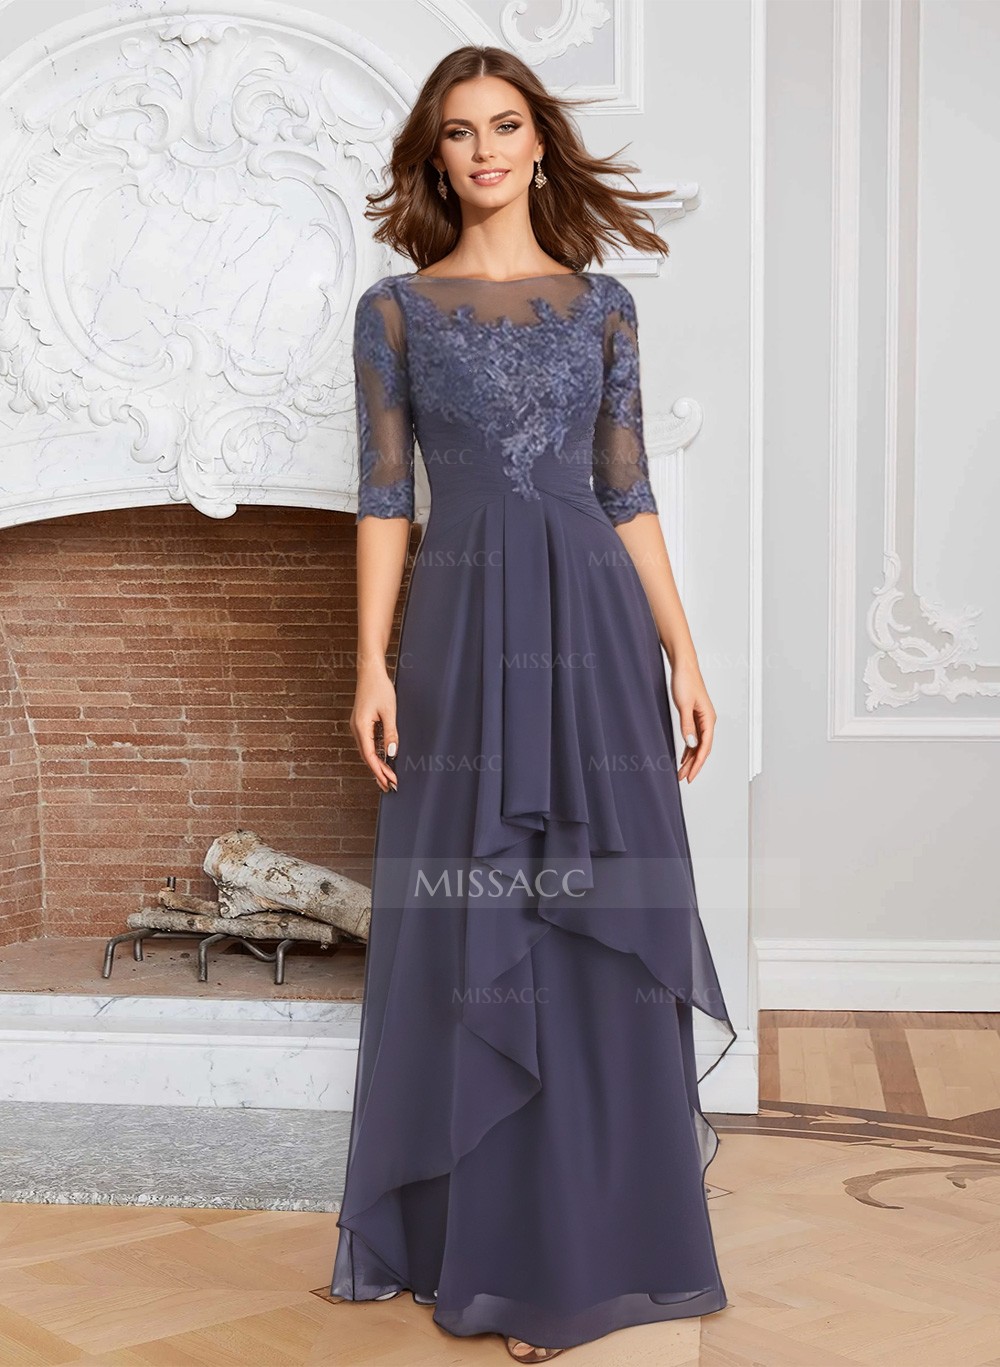 A-Line Illusion Neck 1/2 Sleeves Chiffon Mother Of The Bride Dresses With Cascading Ruffles